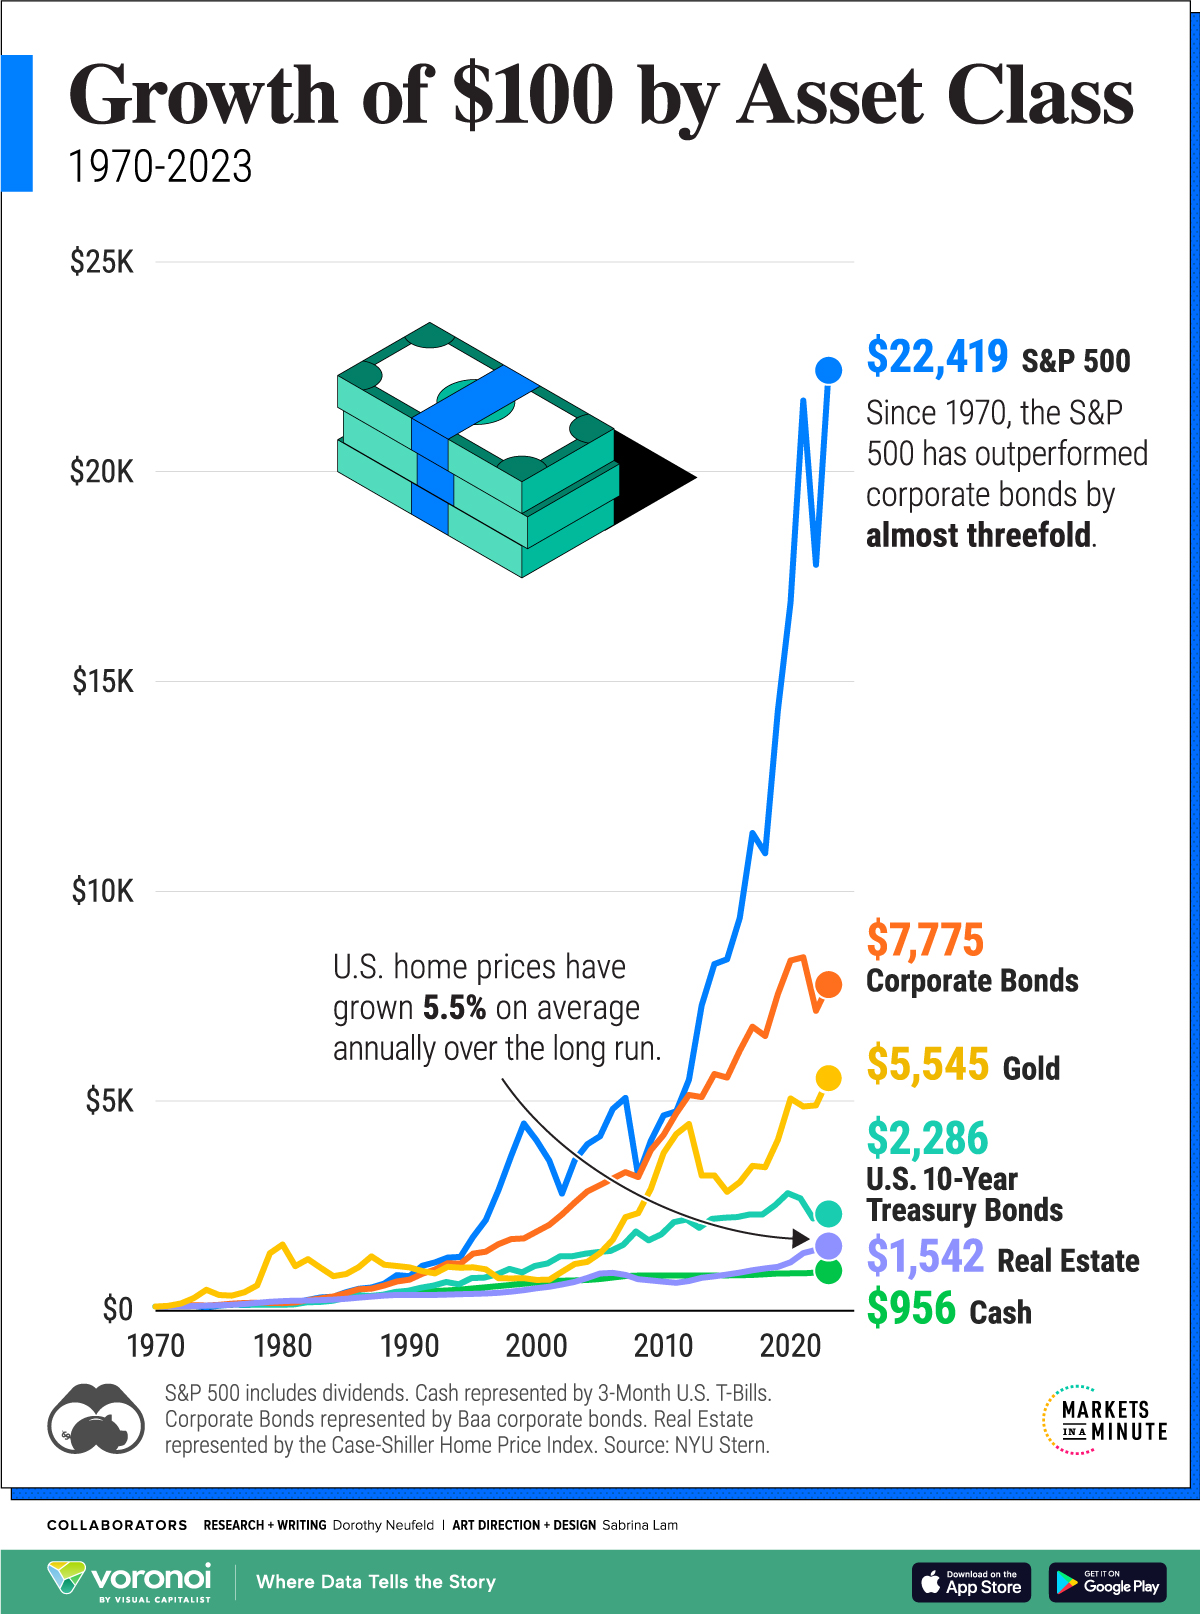 This line chart shows the growth of a $100 investment between 1970 and 2023, by asset class.